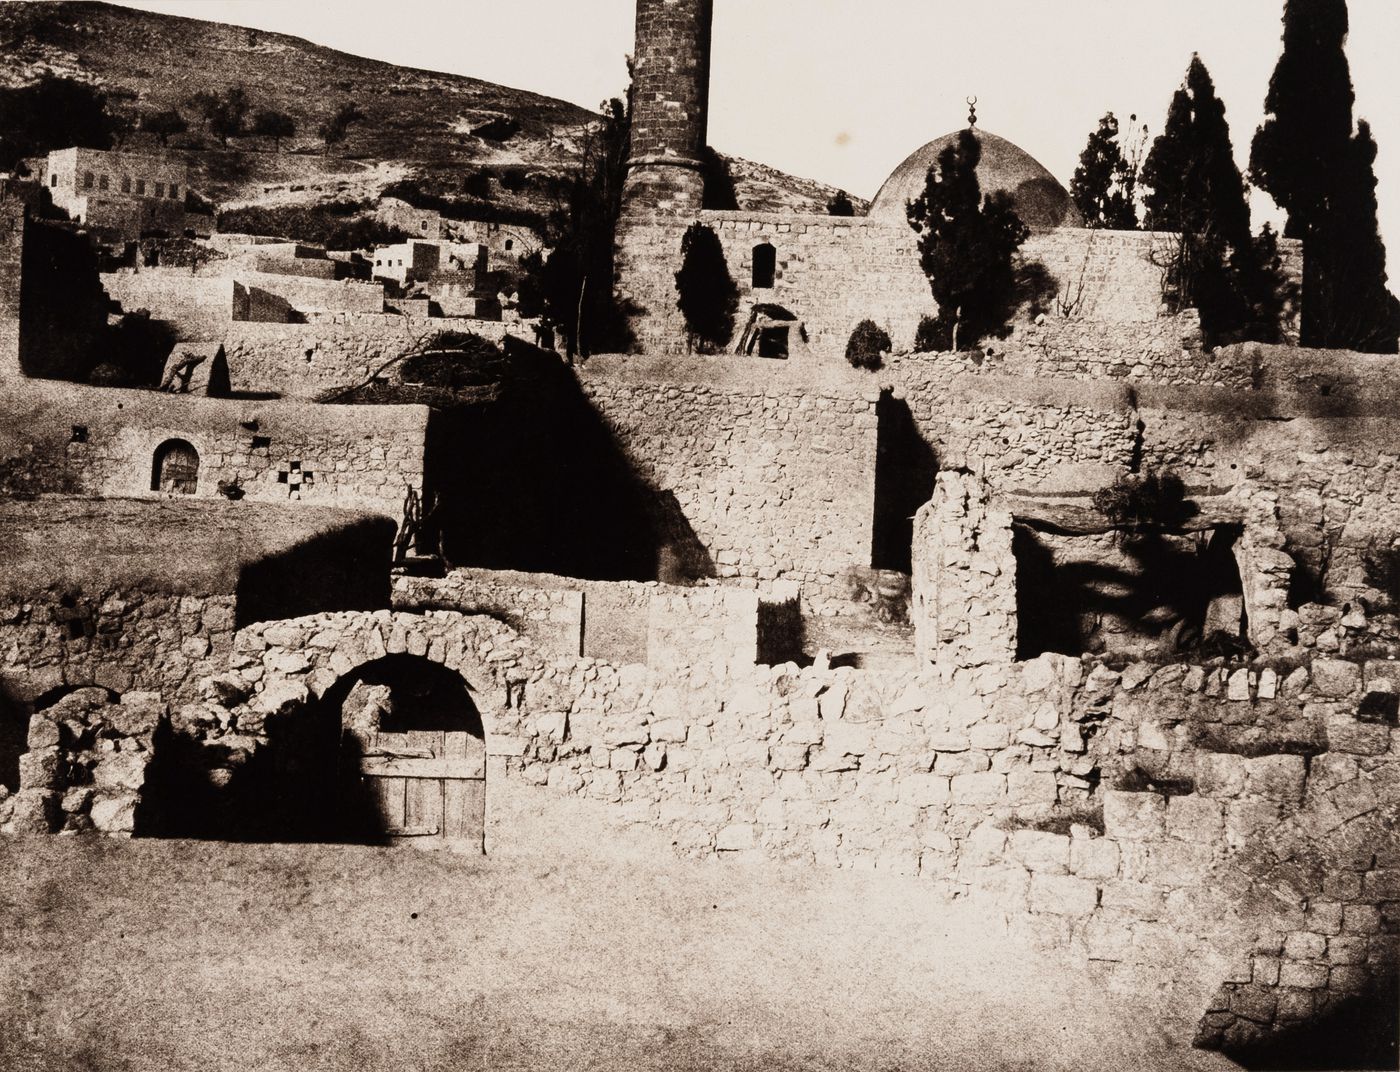 View of Nazareth showing a mosque, Ottoman Empire (now in Israel)